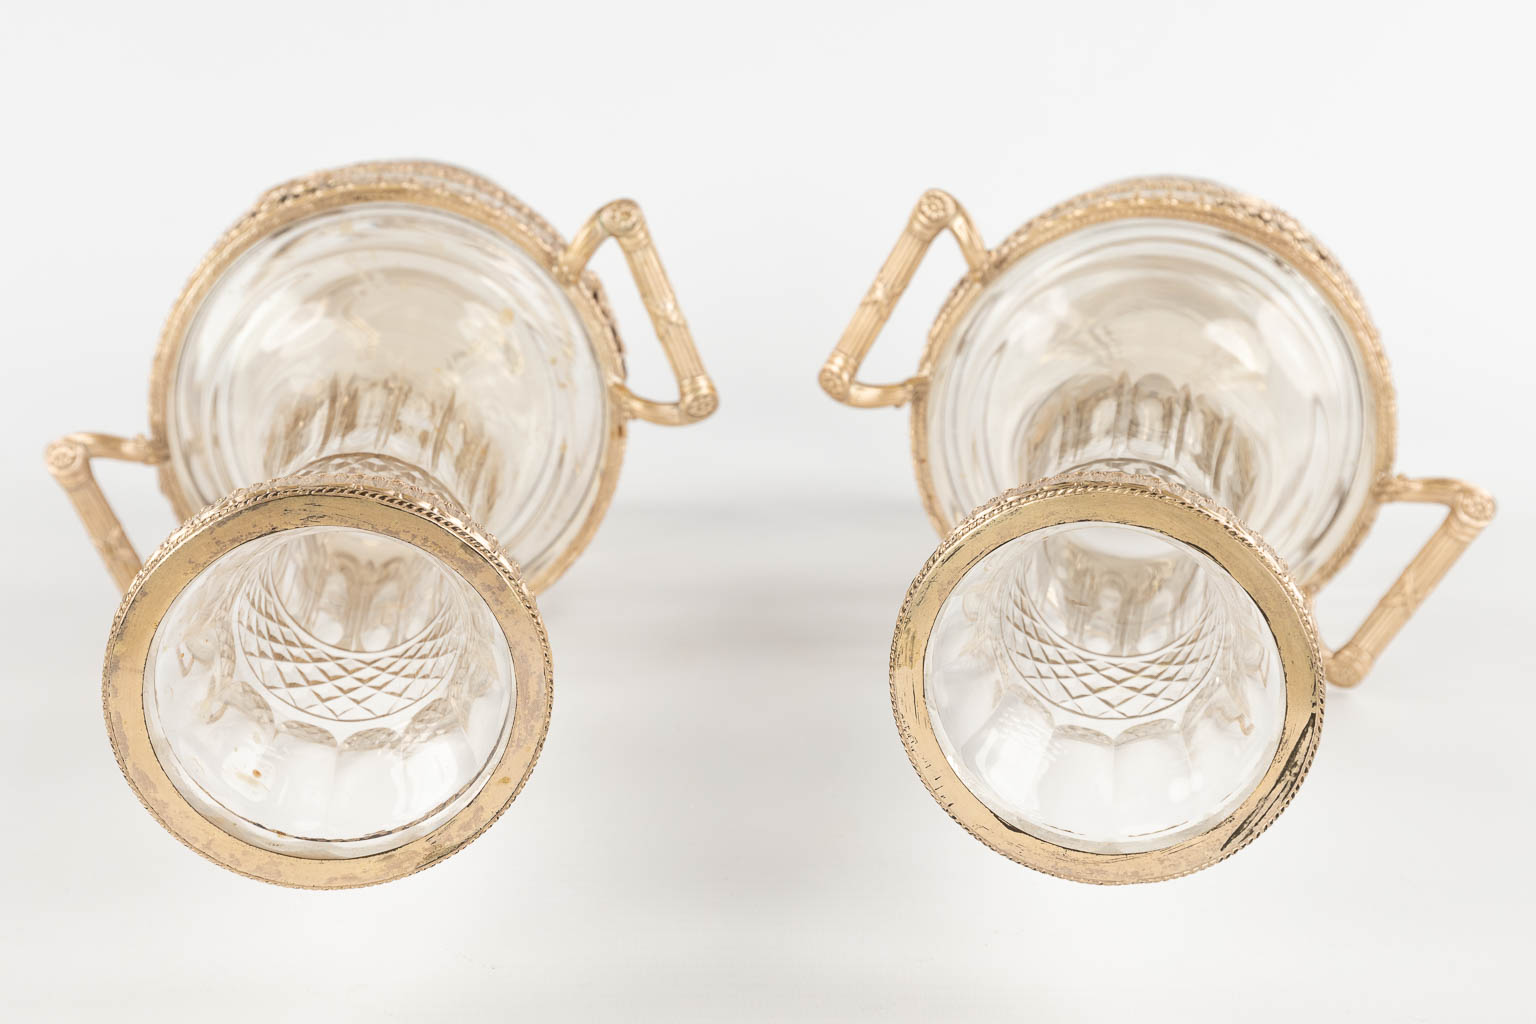 A pair of decorative vases, silver-plated bronze on glass, Neoclassical. 20th C. (D:14 x W:18 x H:33 cm)